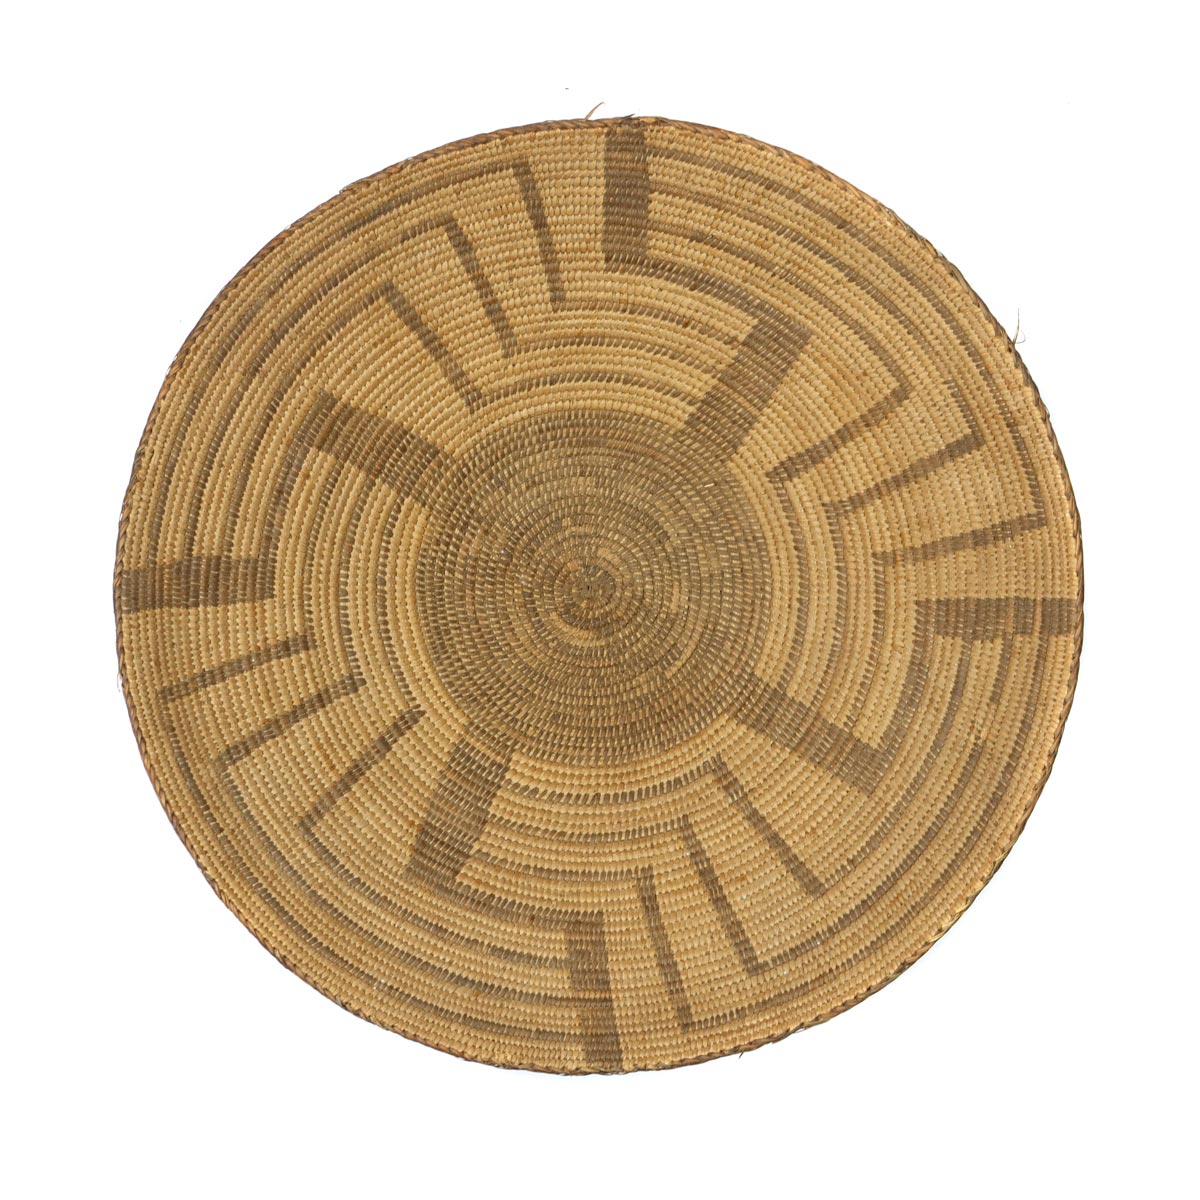 Pima Basket with Whirling Logs Design c. 1890s, 5" x 19" (SK3239) 1